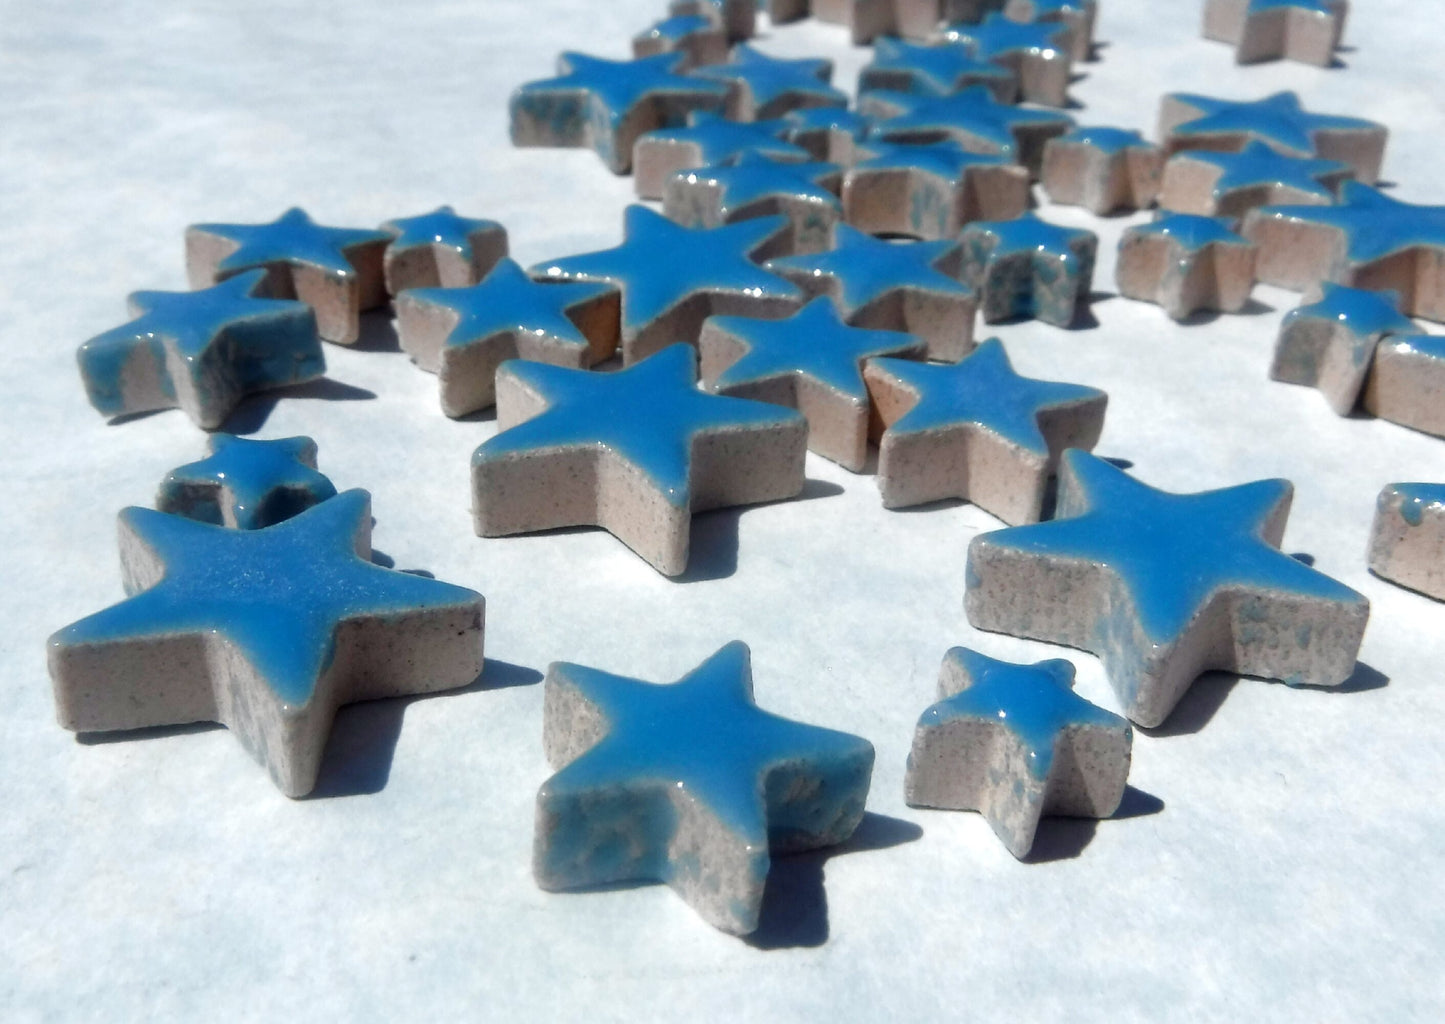 Mediterranean Blue Stars Mosaic Tiles - 50g Ceramic in Mix of 3 Sizes - 20mm, 15mm, 10mm - Thalo Blue